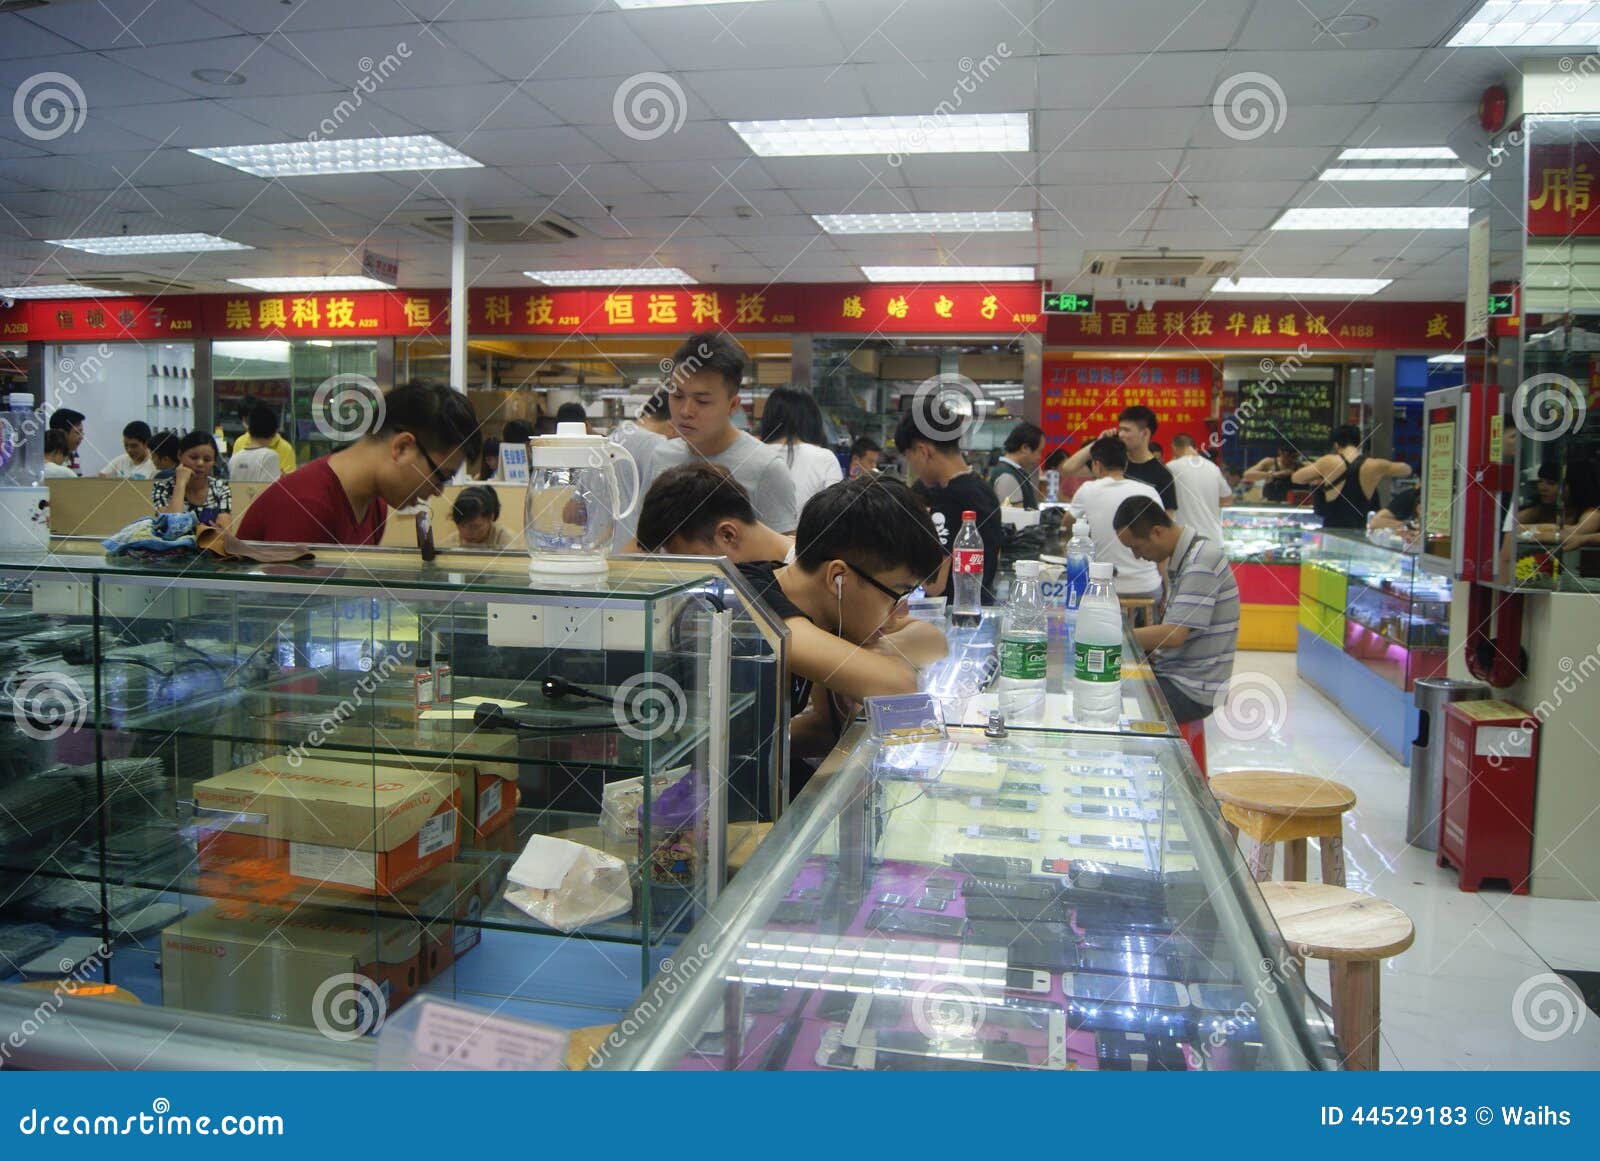 animation Mount Bank Pest Shenzhen, China: Mobile Phone Accessories Stores Editorial Stock Photo -  Image of customers, shennan: 44529183